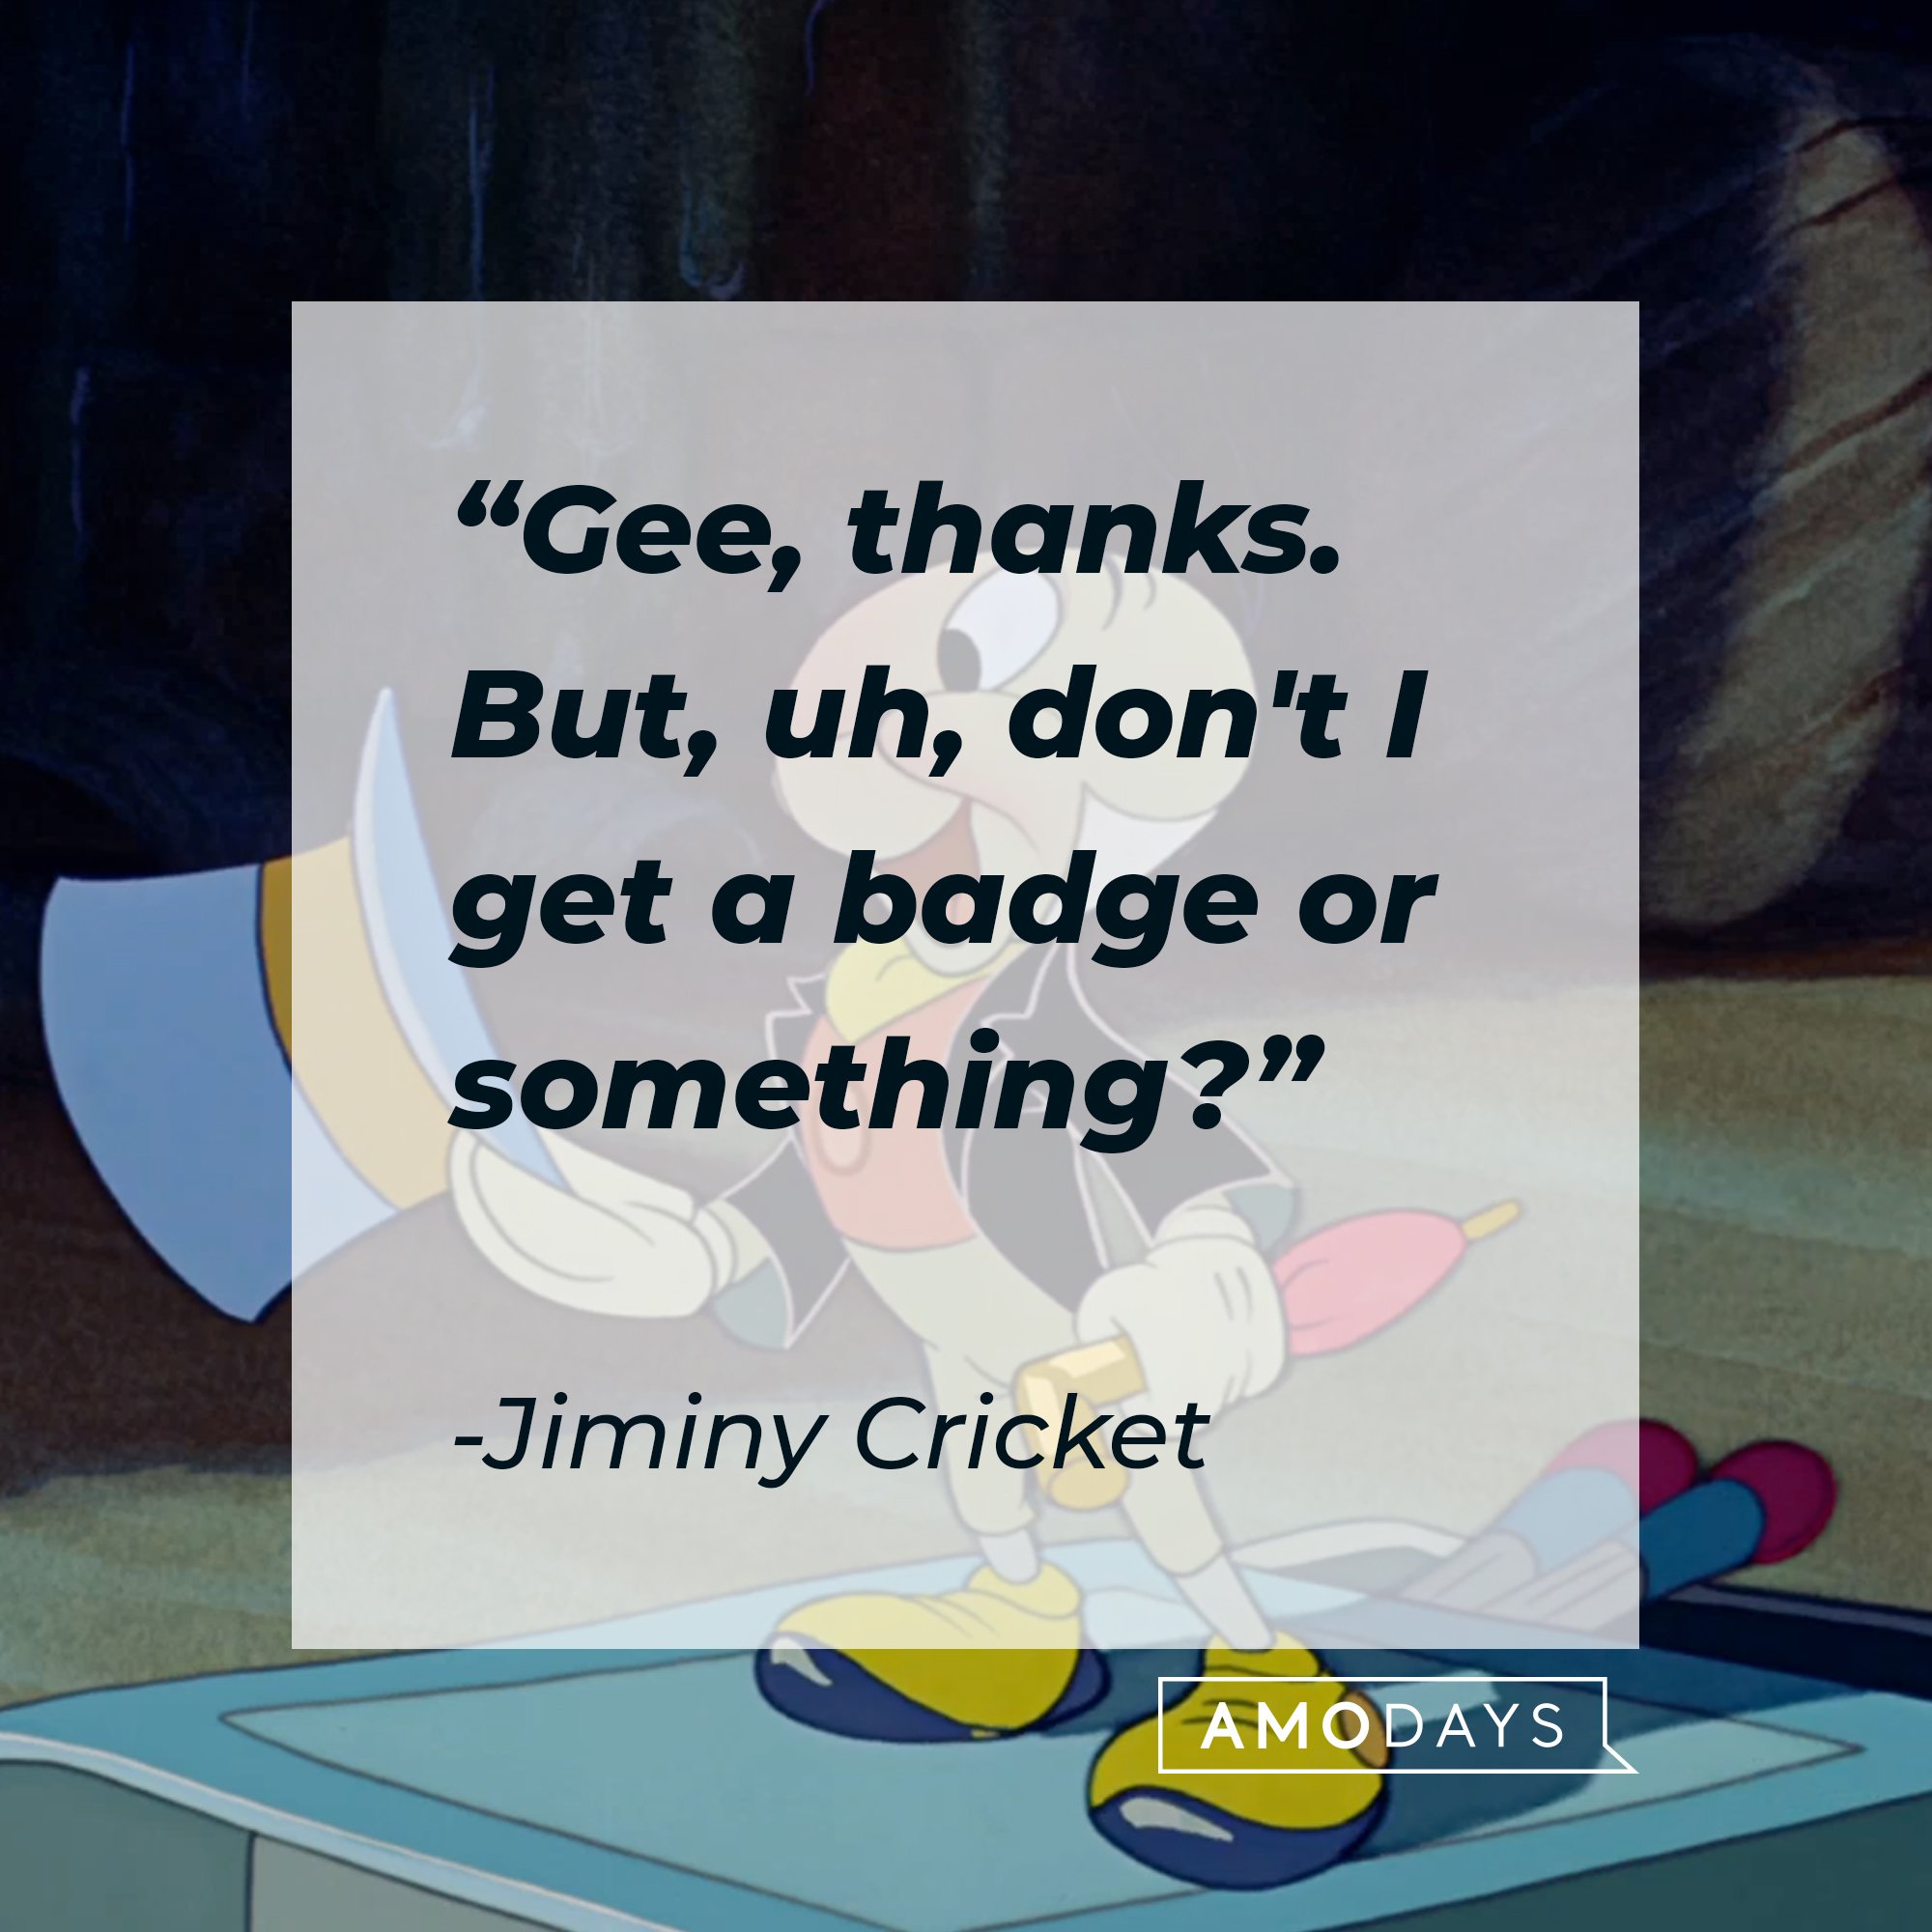  Jiminy Cricket's quote: "Gee, thanks. But, uh, don't I get a badge or something?" | Image: AmoDays